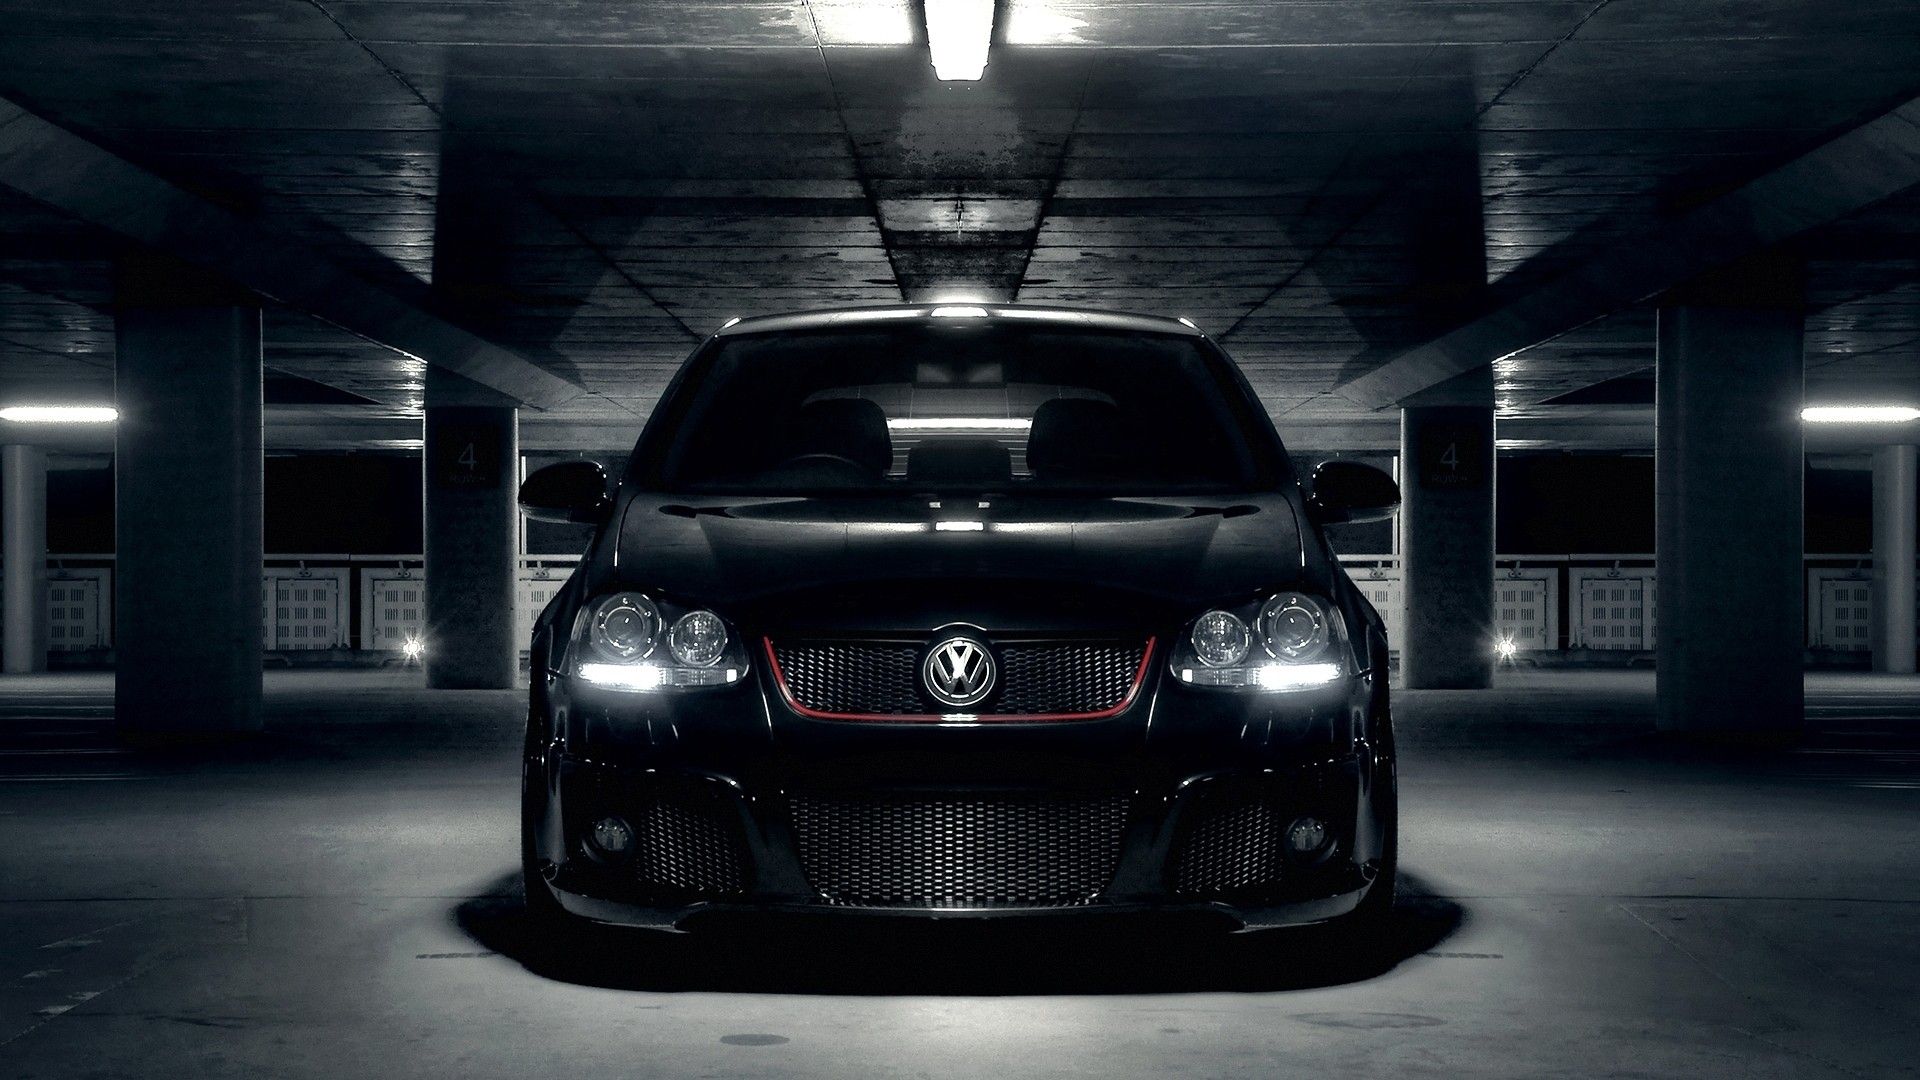 VW Golf GTI picture for desktop and .com